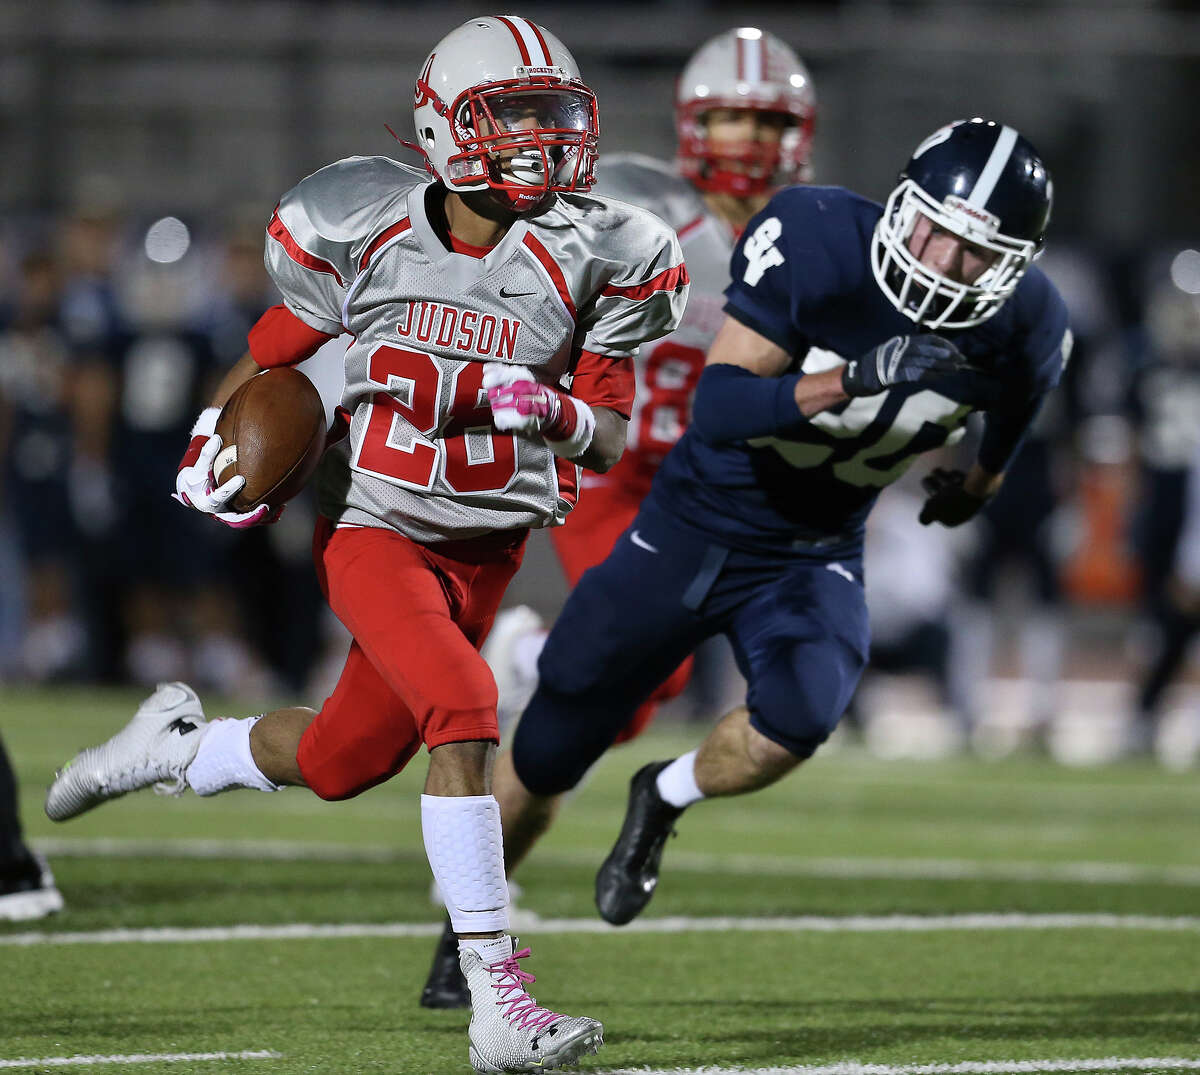 Rocket running back Christian Guillory sprints through the middle for a long gain in the first half as Judson beat Smithson Valley, 31-26, on Nov. 7 at Rutledge Stadium.